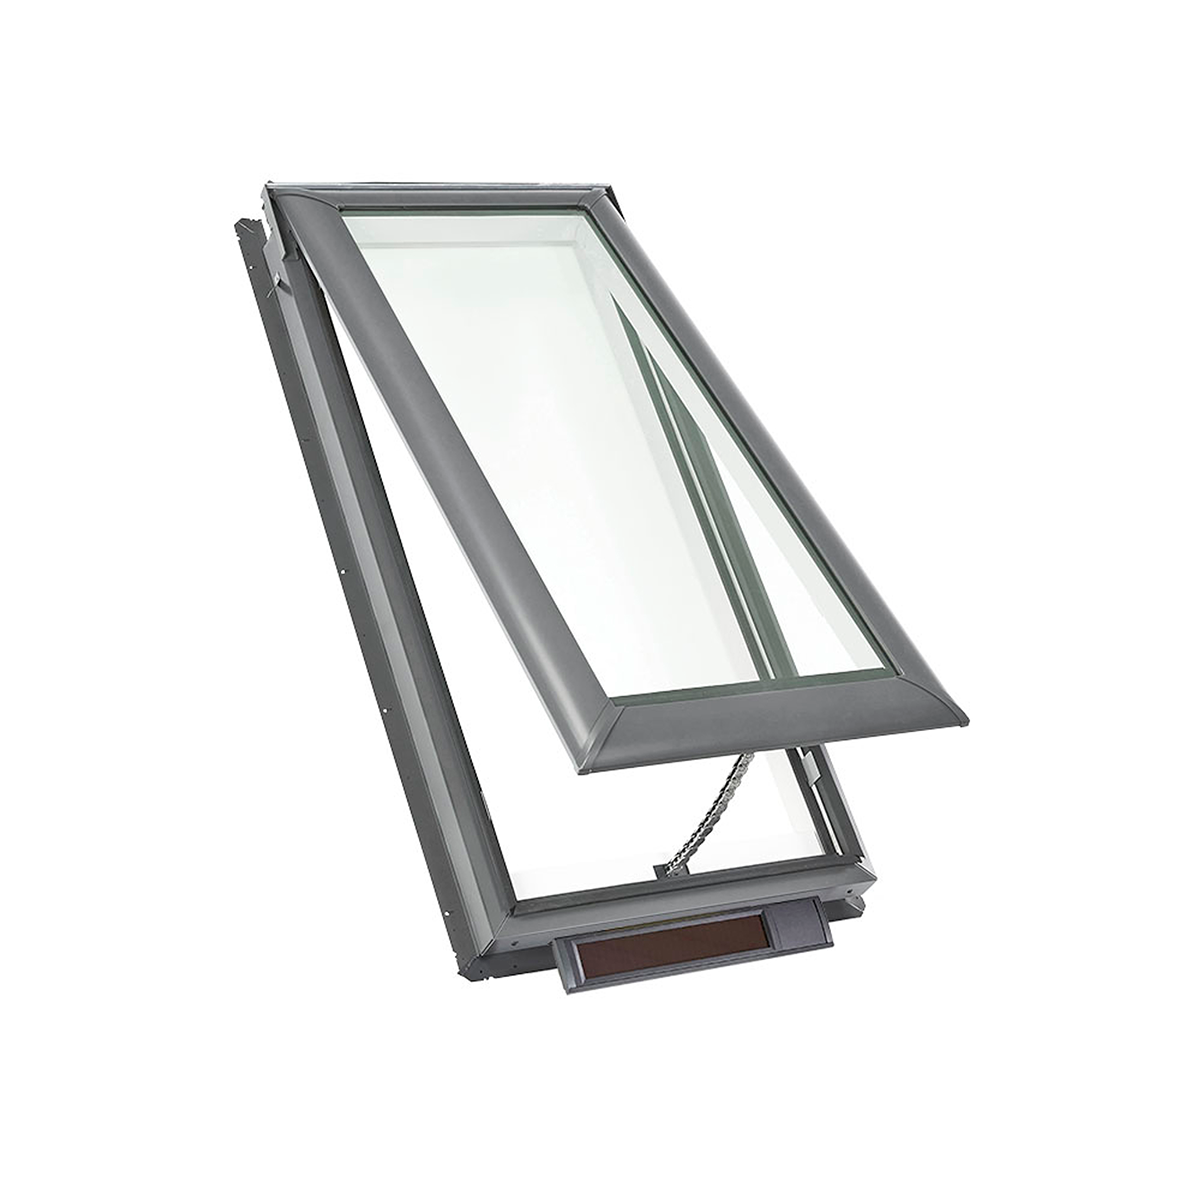 Solar Powered Deck-Mount Skylight with Laminated Low-E3 Glass - 30-1/16 in. x 30 in. - VSS M02